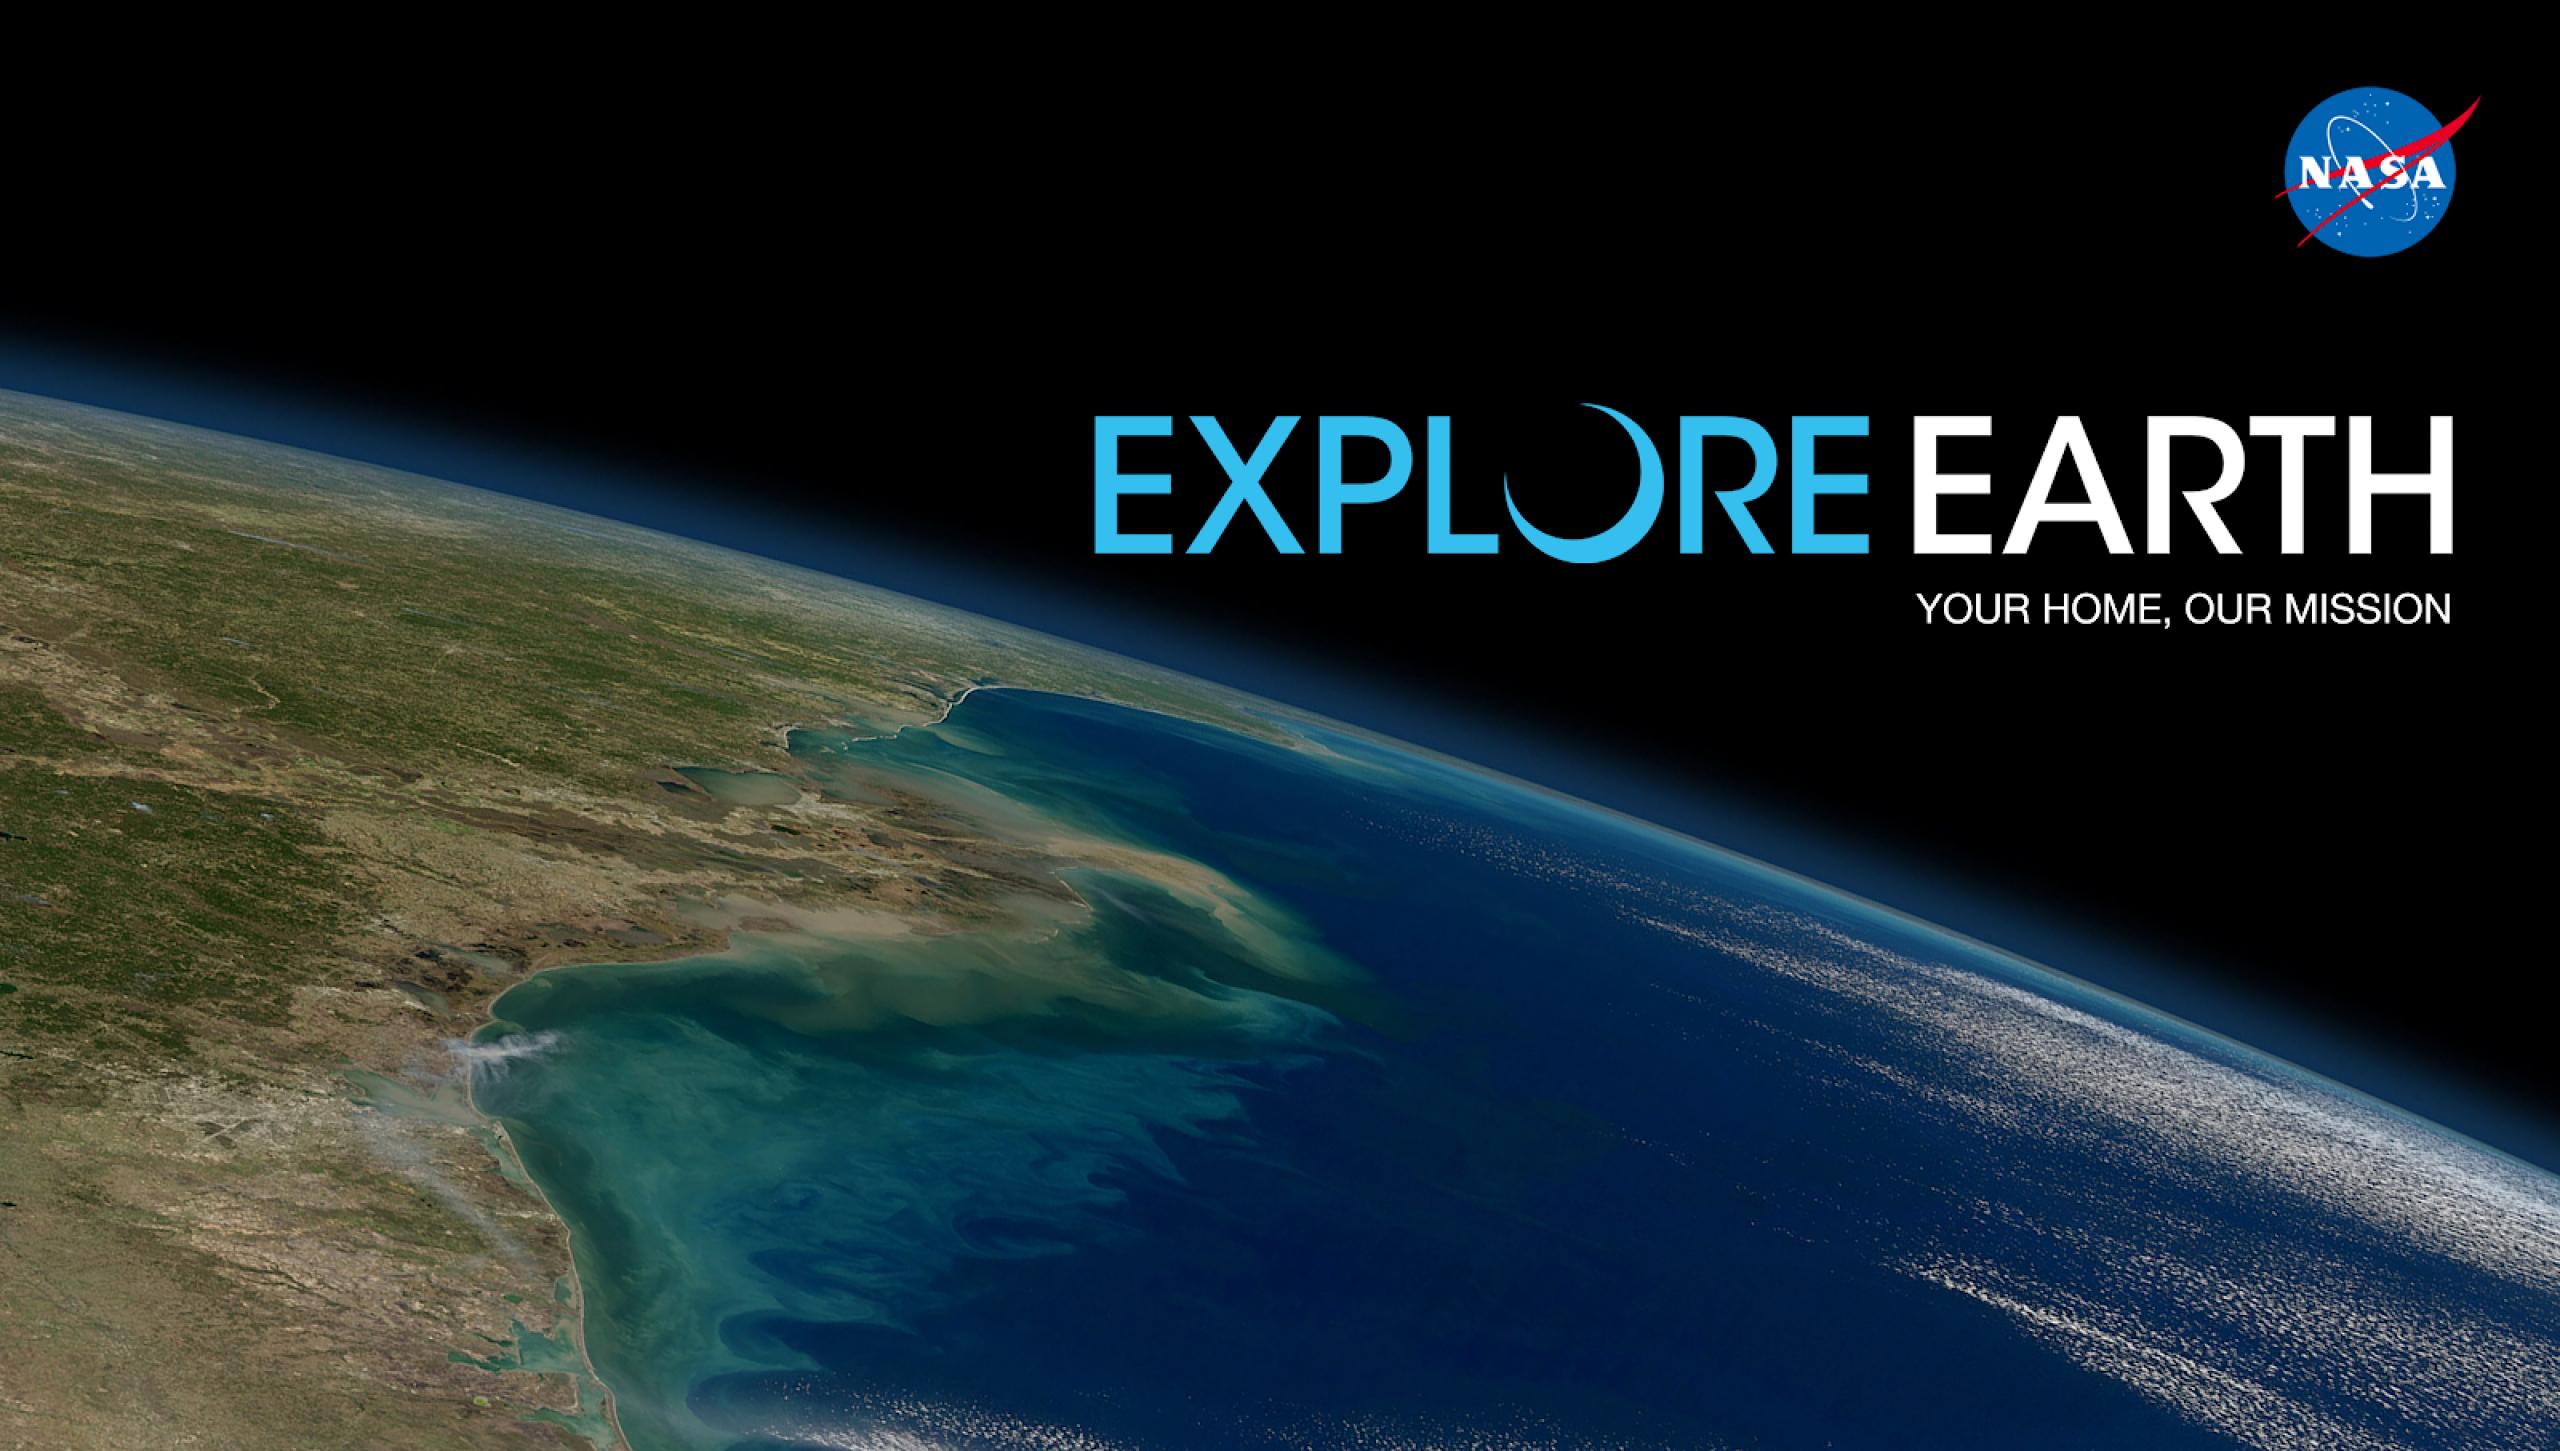 Explore Earth title overlaying an image of the earth